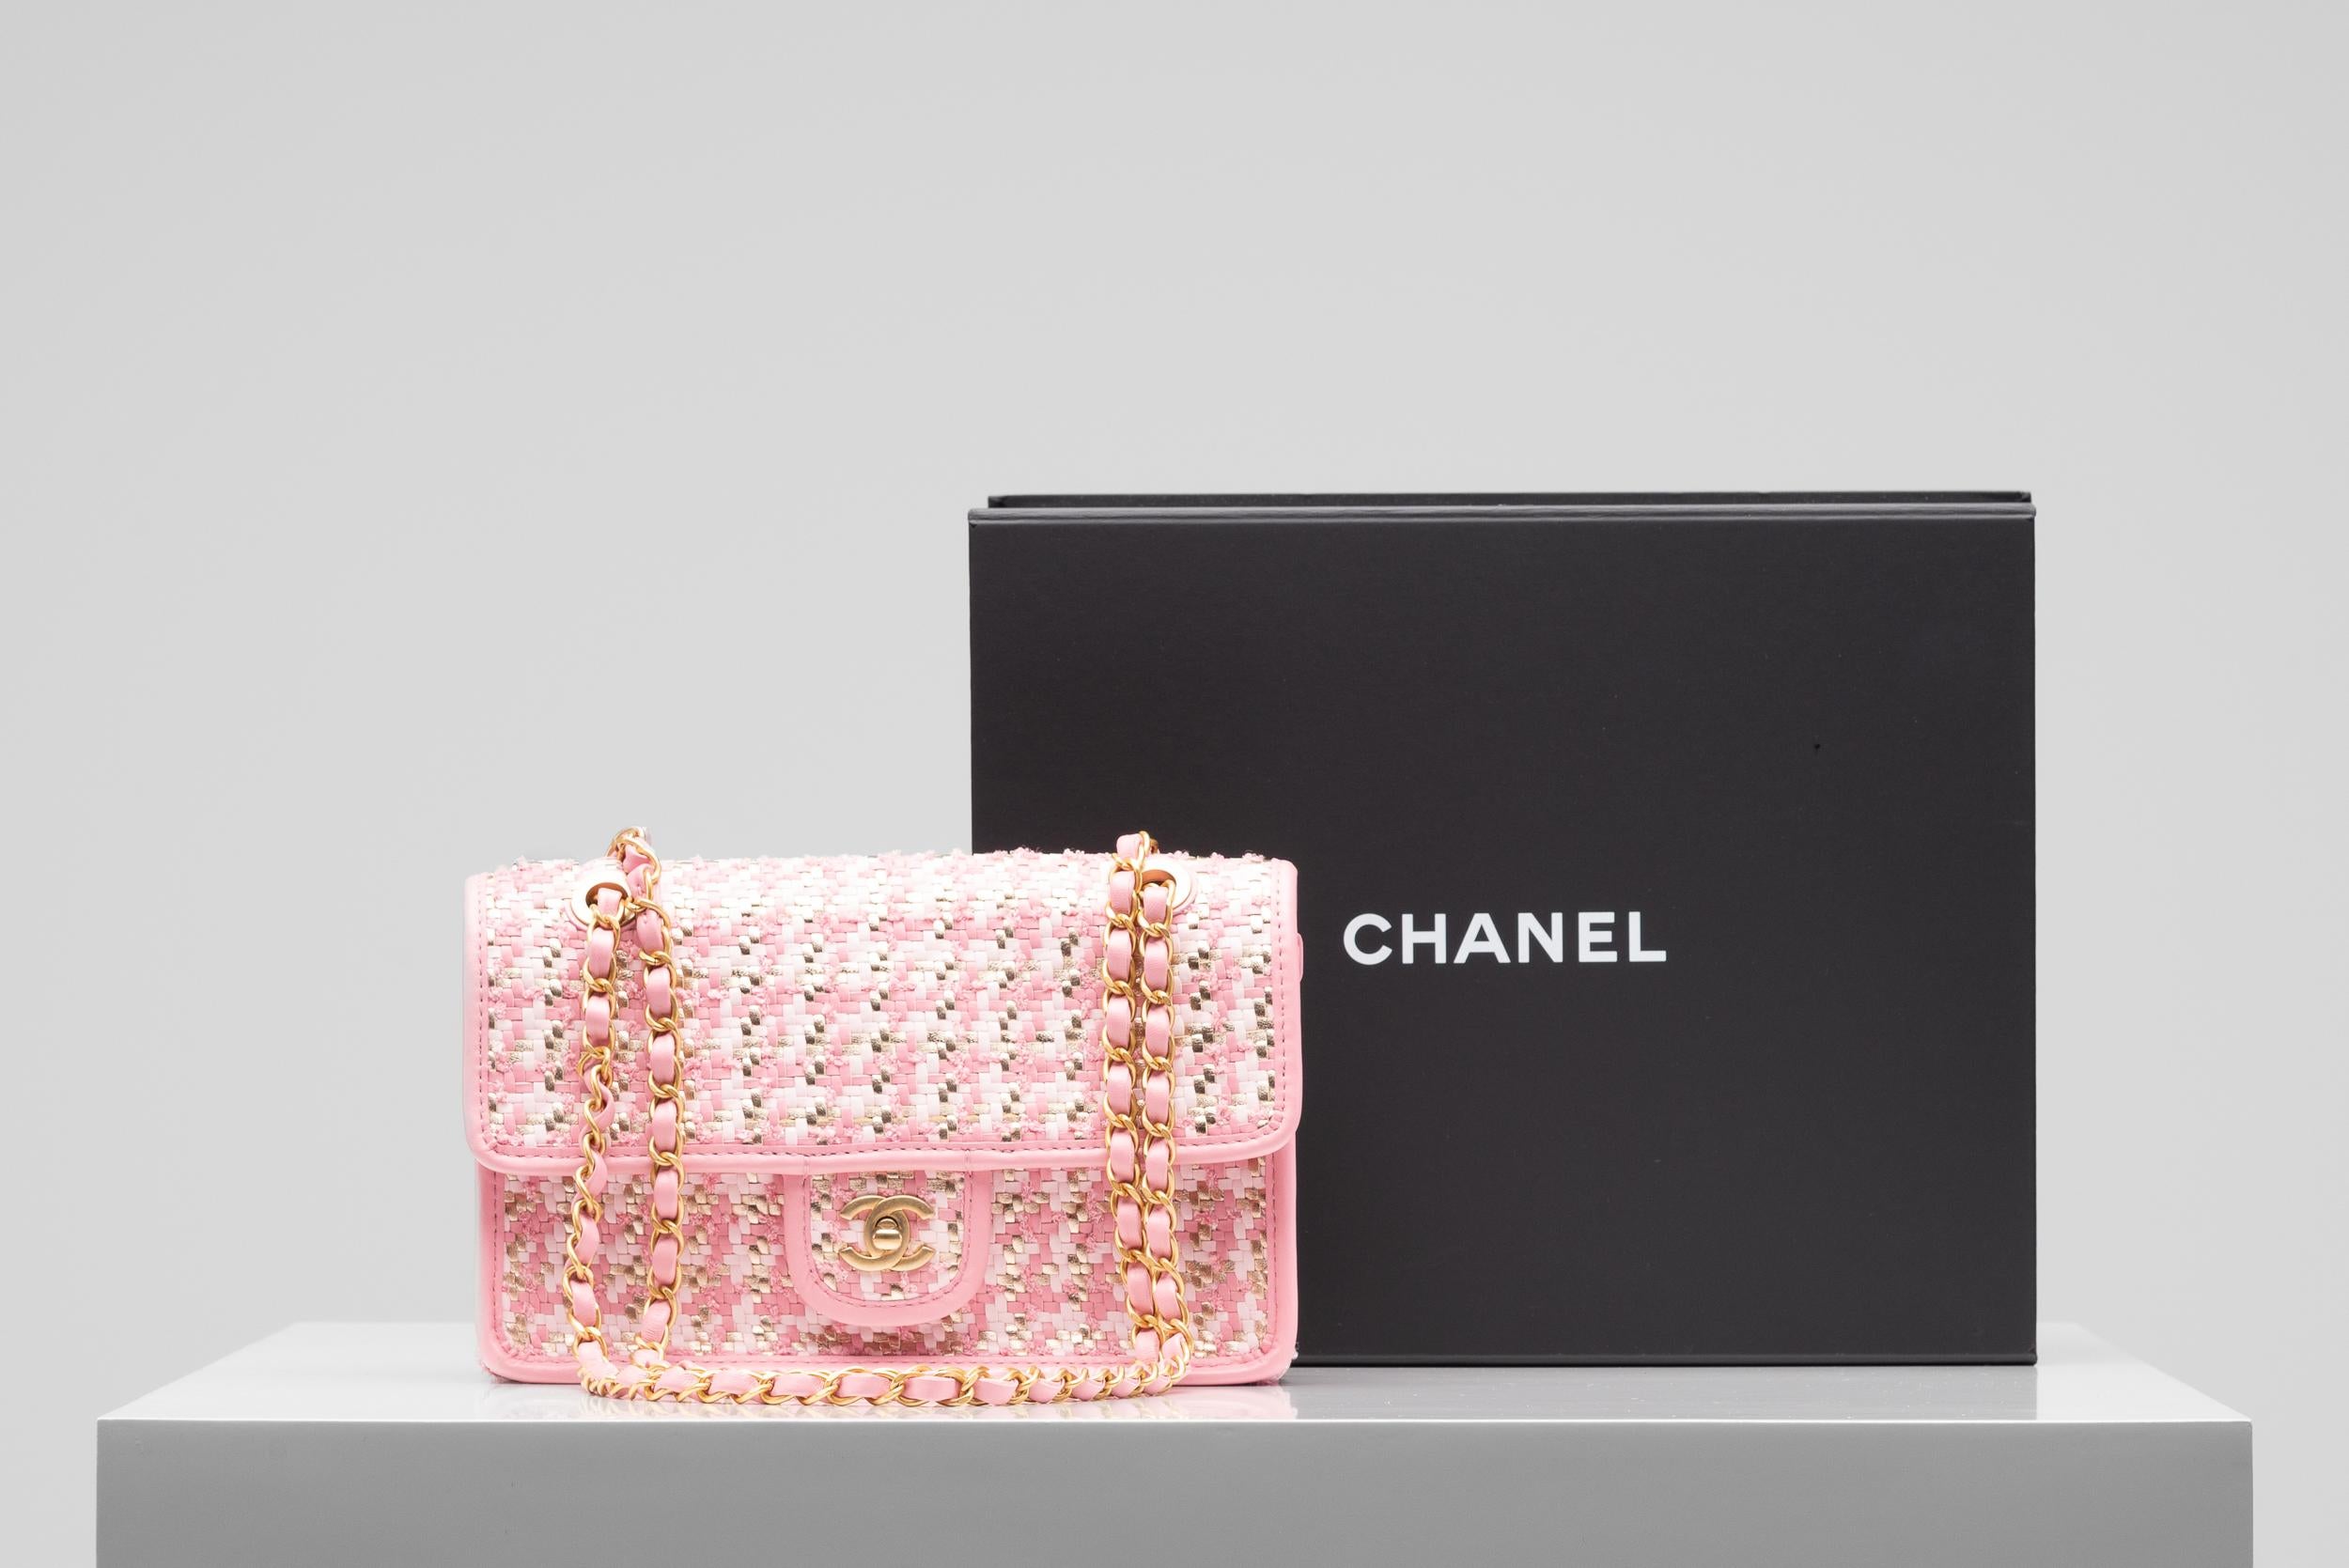 From the collection of SAVINETI we offer this rare Chanel Flap Bag:
- Brand: Chanel
- Model: Flap Bag Pink Tweed/Lambskin
- Year: 2023
- Condition: Excellent (as new)
- Materials: lambskin leather, tweed, Gold-Tone hardware
- Extras: Full-Set